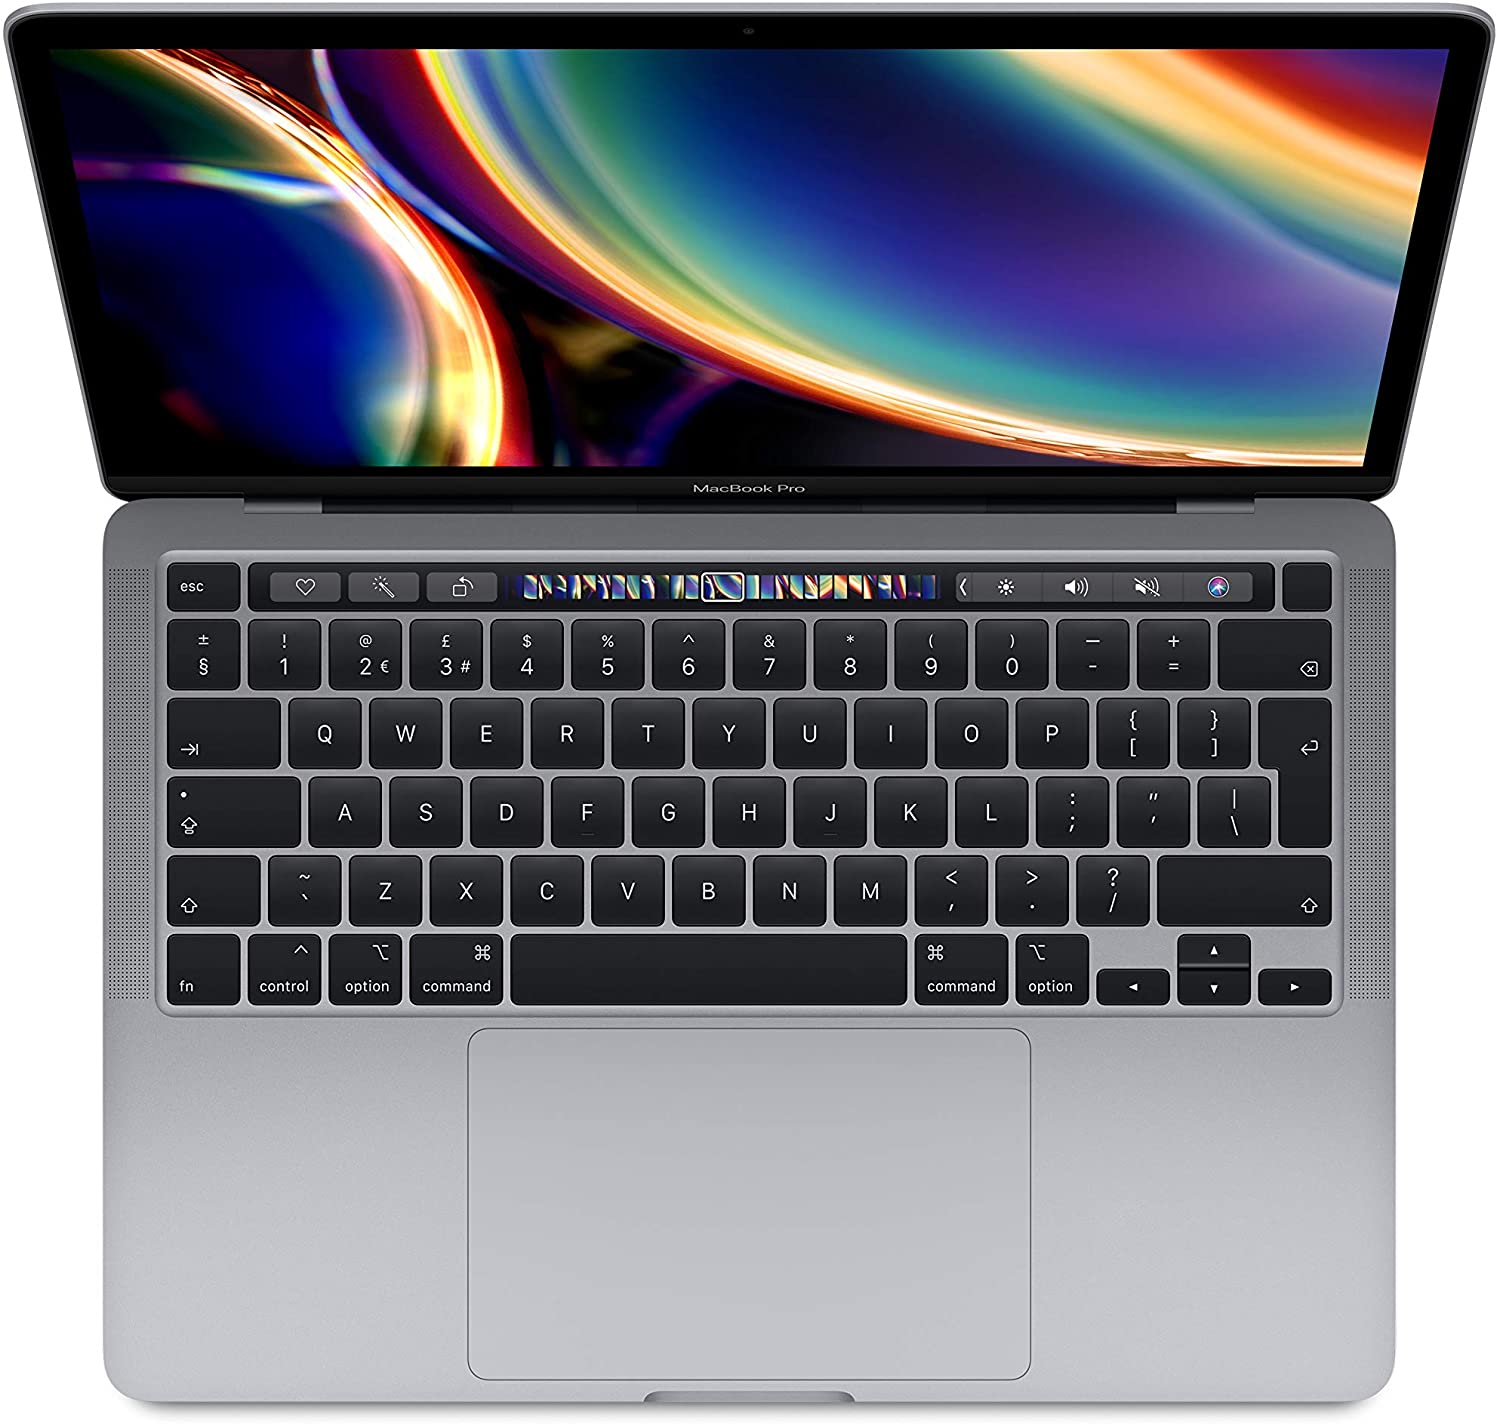 MacBook Pro 13-inch with Touch Bar and Touch ID (2020) – Core i5 1.4GHz 8GB 256GB - Space Gray